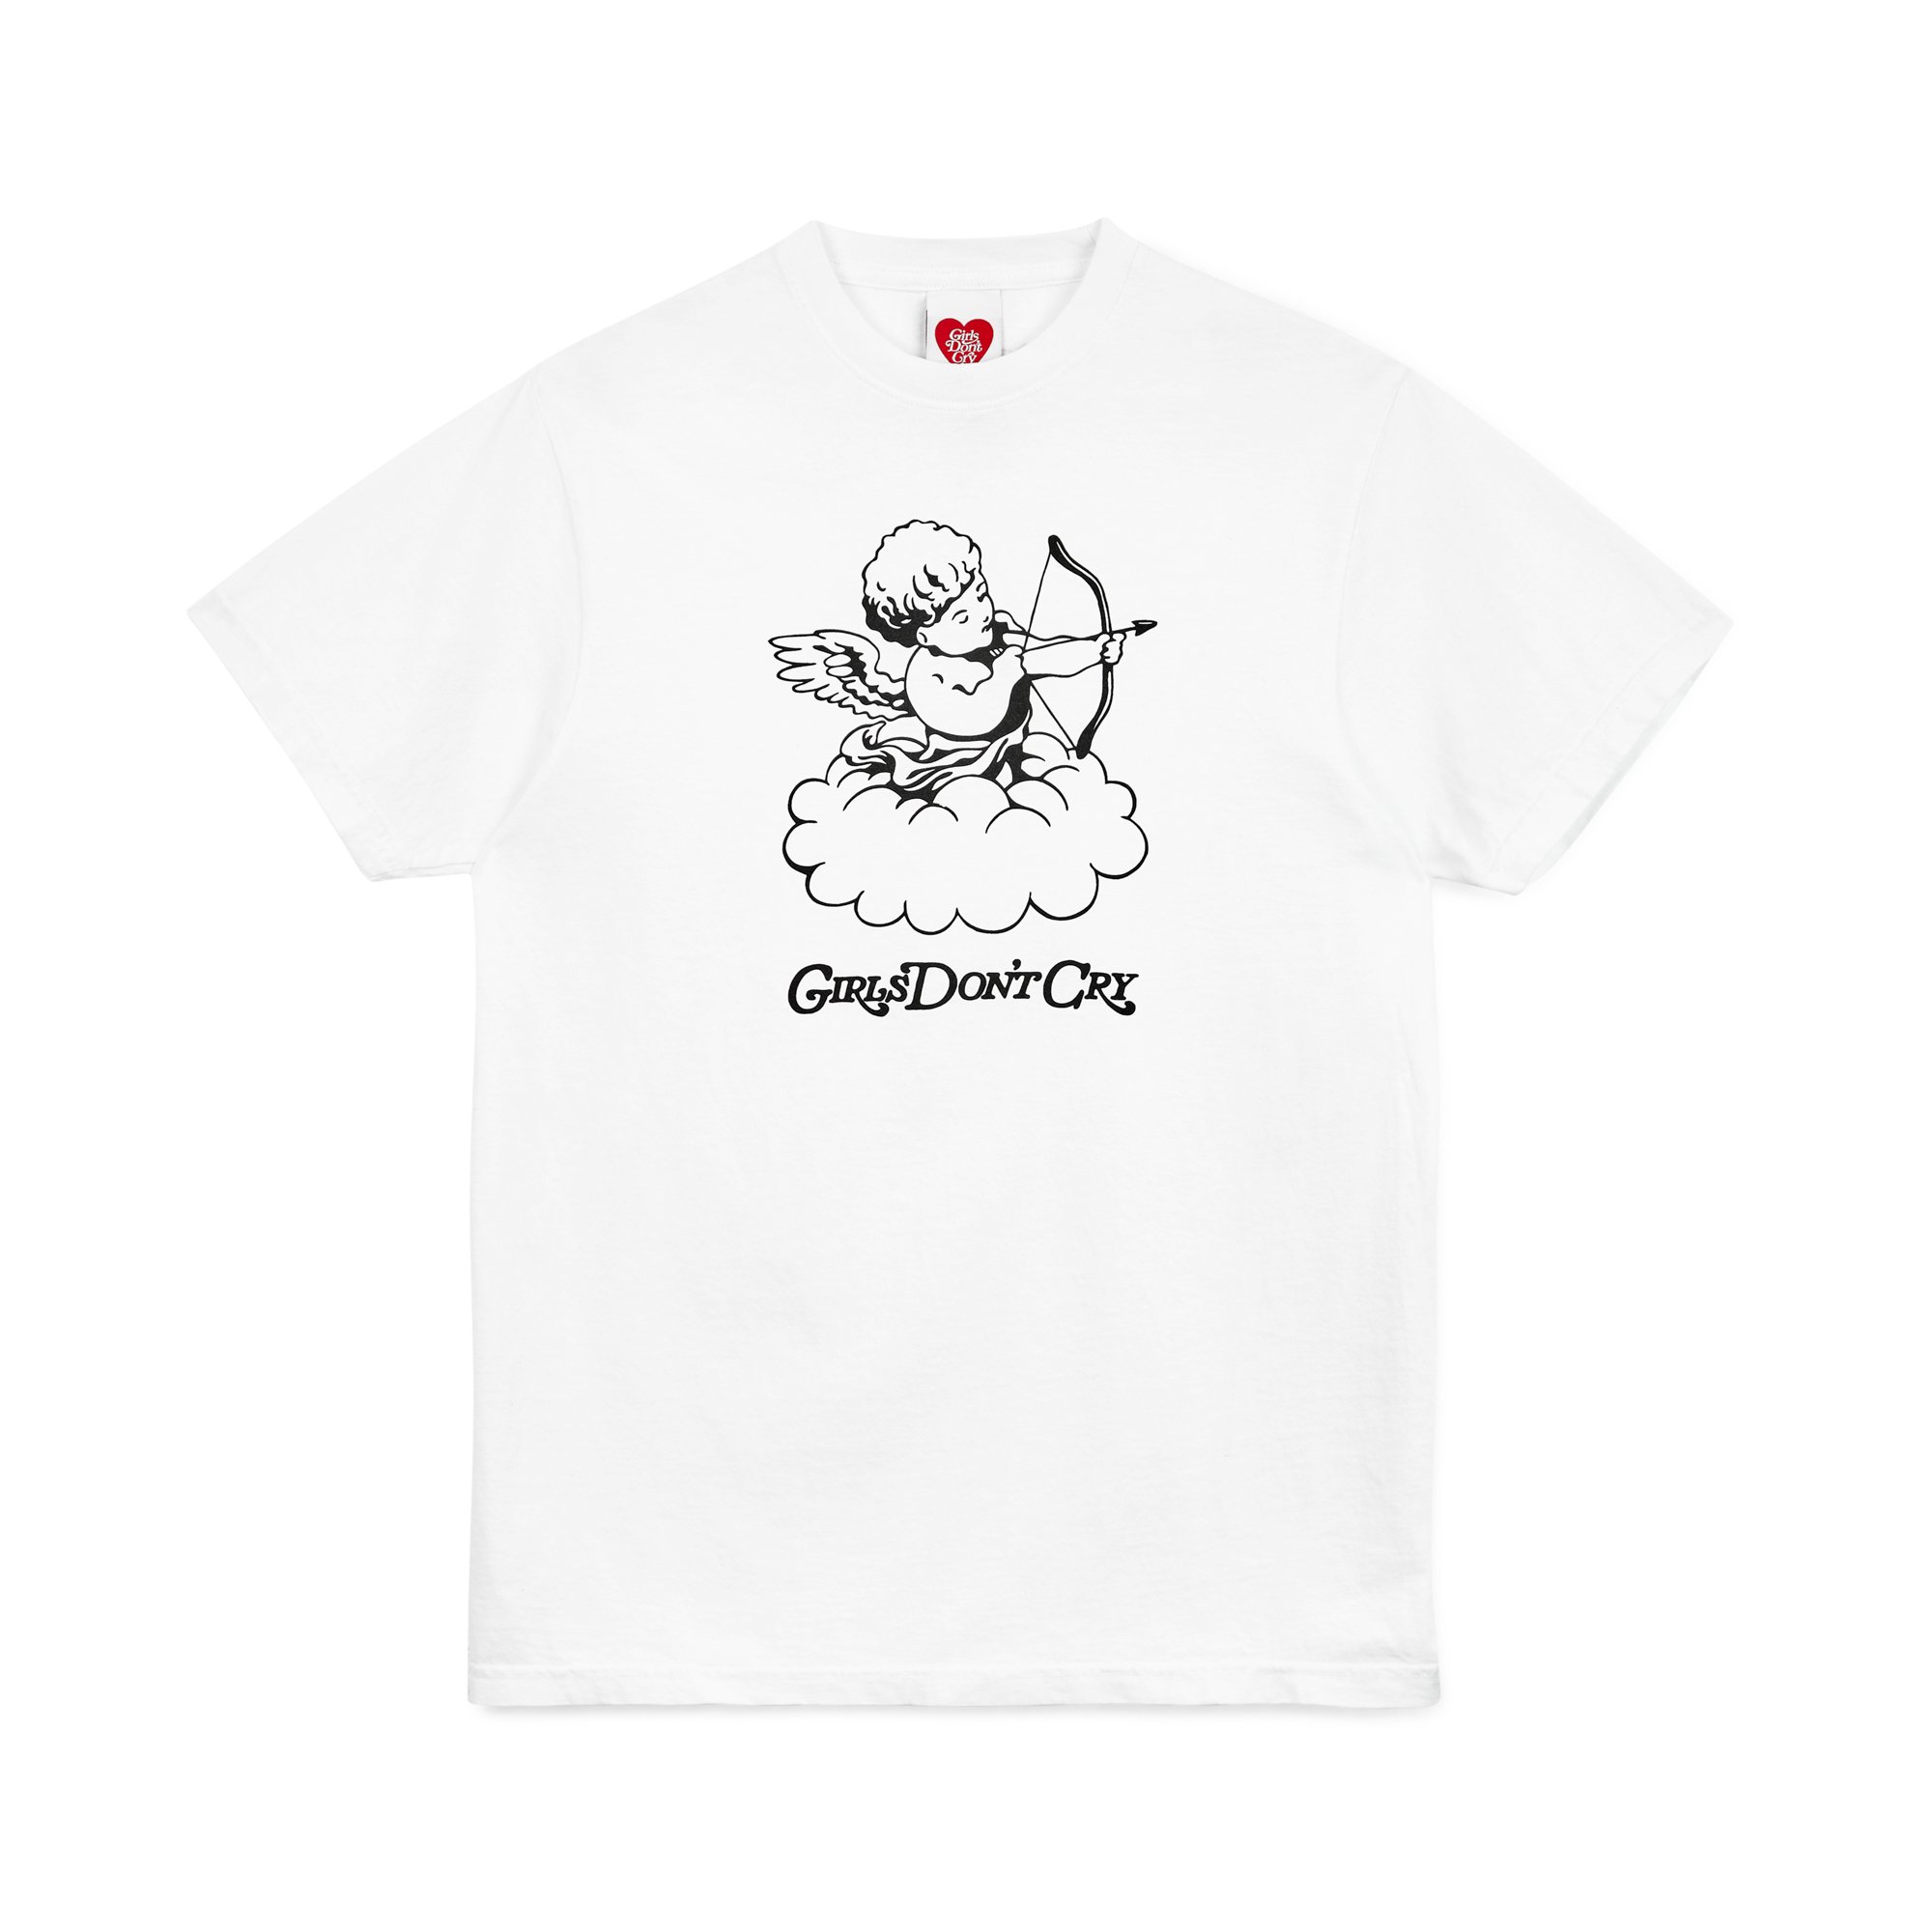 Girls Don't Cry Angel Tee White - SS21 Men's - US